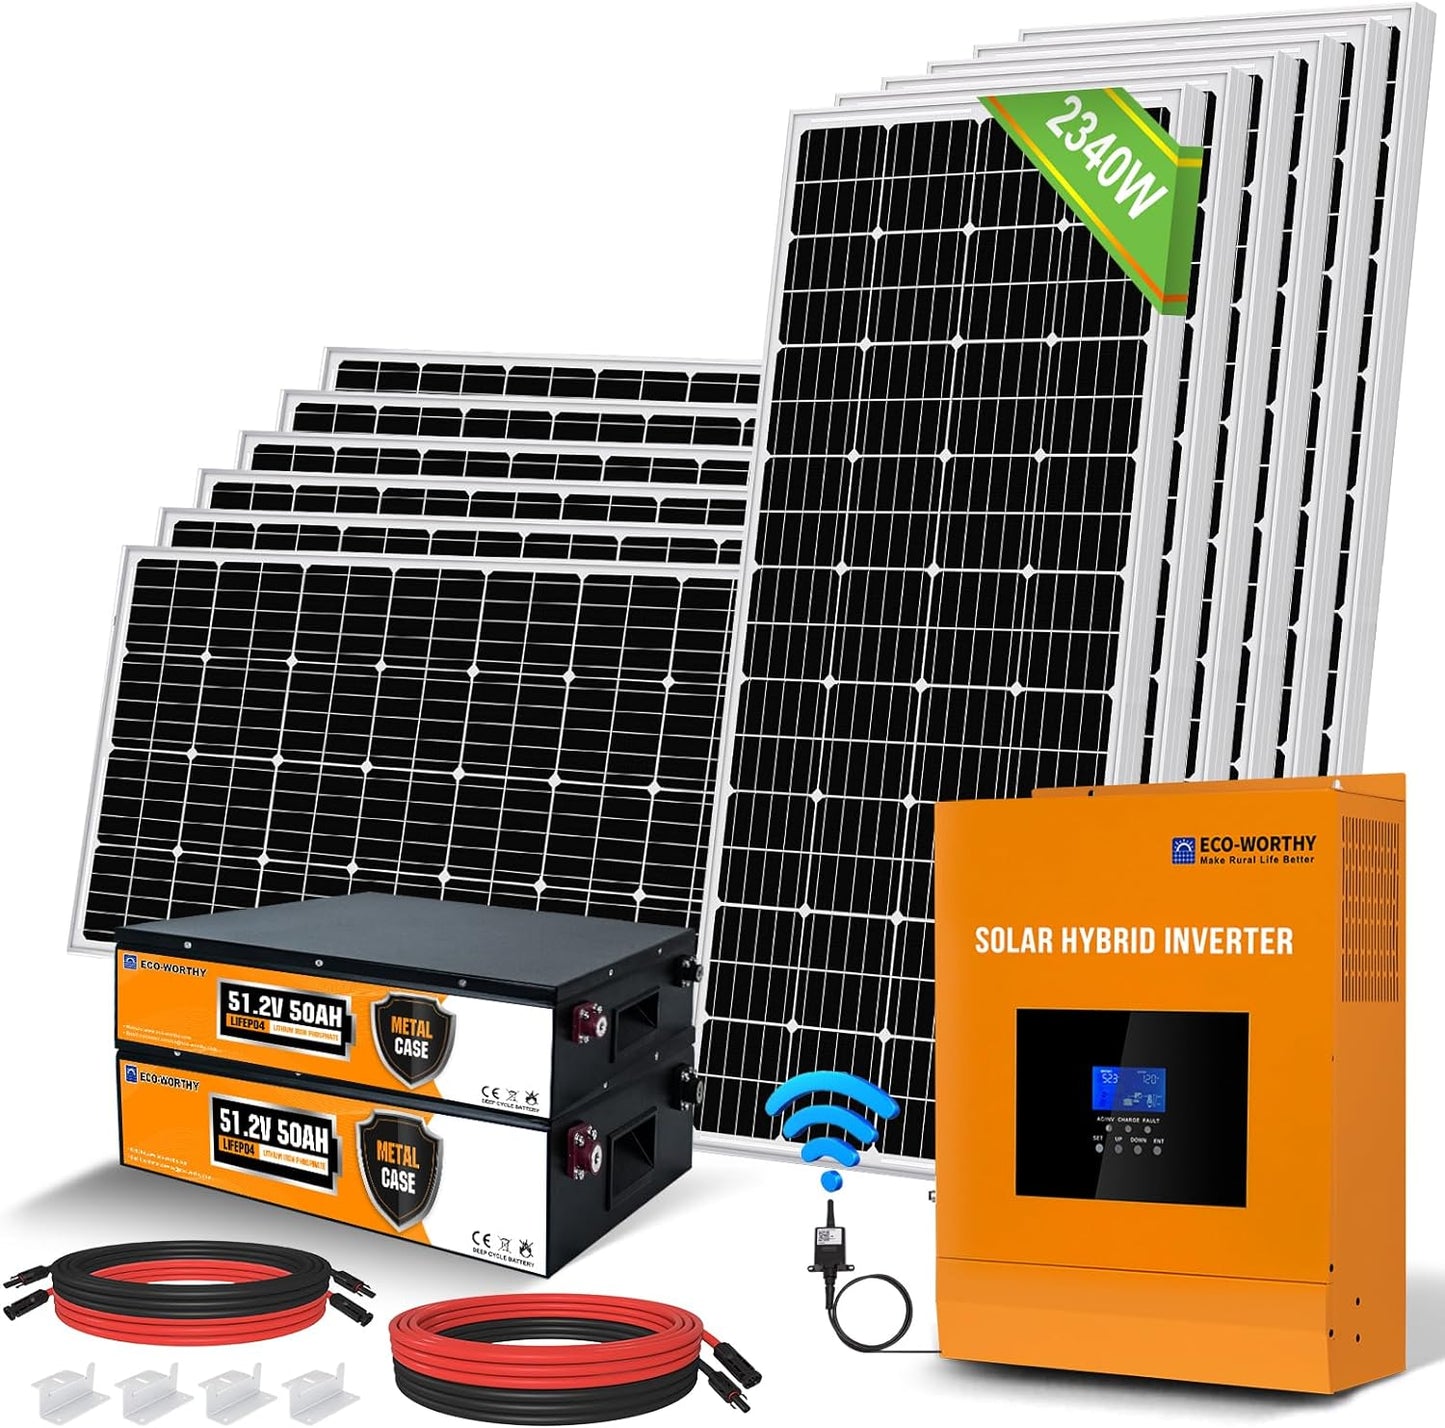 9.4KWH 2340W 48V off Grid Complete Solar Panel Kit for Home/Shed: 12Pcs 195W Solar Panel + 2Pcs 48V 50AH Lithium Battery(5.12Kwh) + 5000W 48V All-In-One MPPT Charger Inverter,Plug and Play